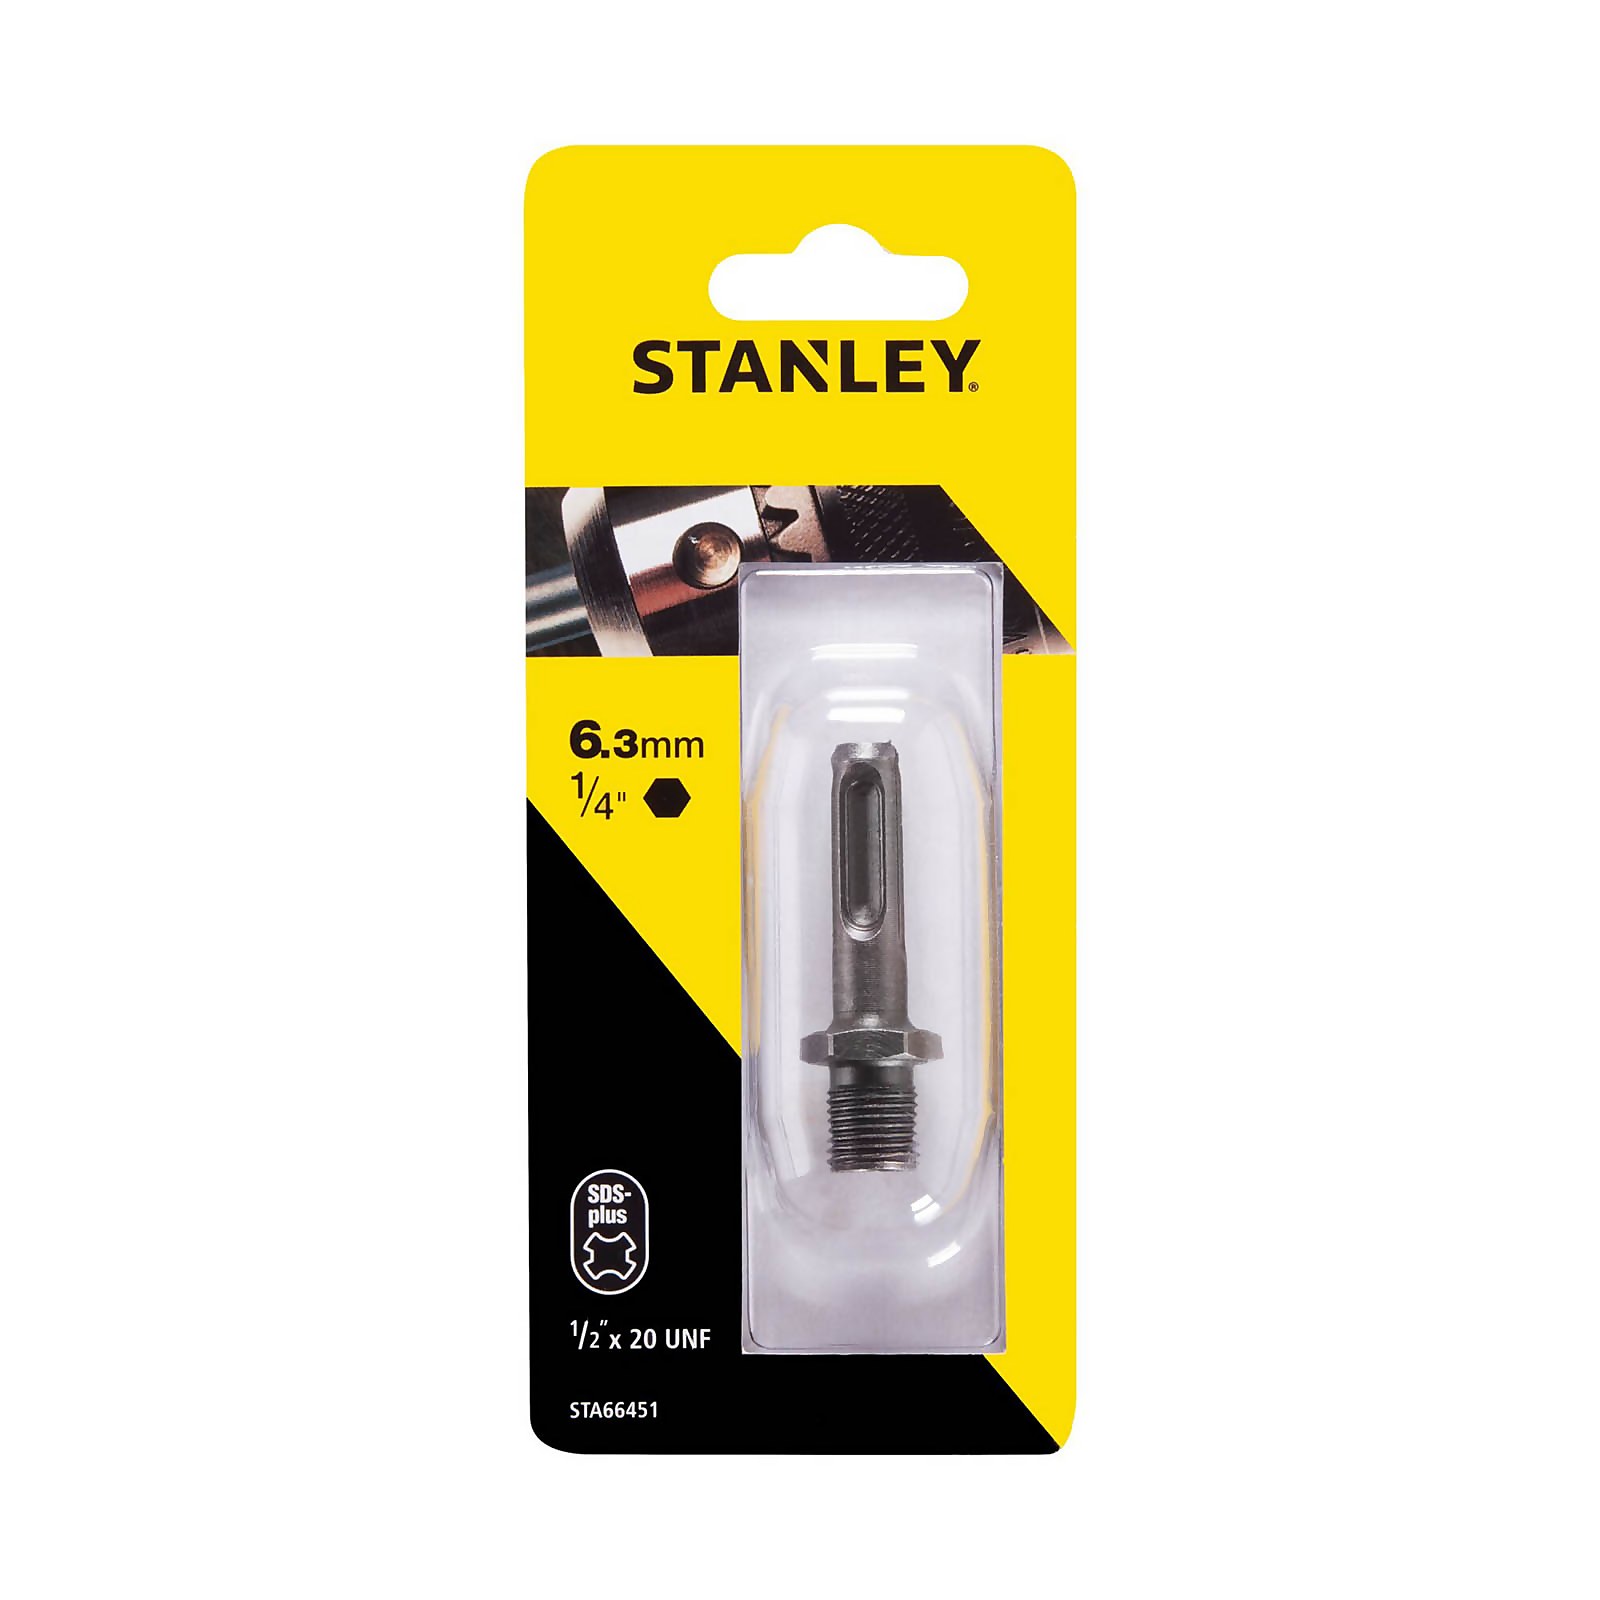 Photo of Stanley Sds Plus Chuck Adapter - 1/2 - 1/4 Hex Shank Convertor -sta66451-qz-